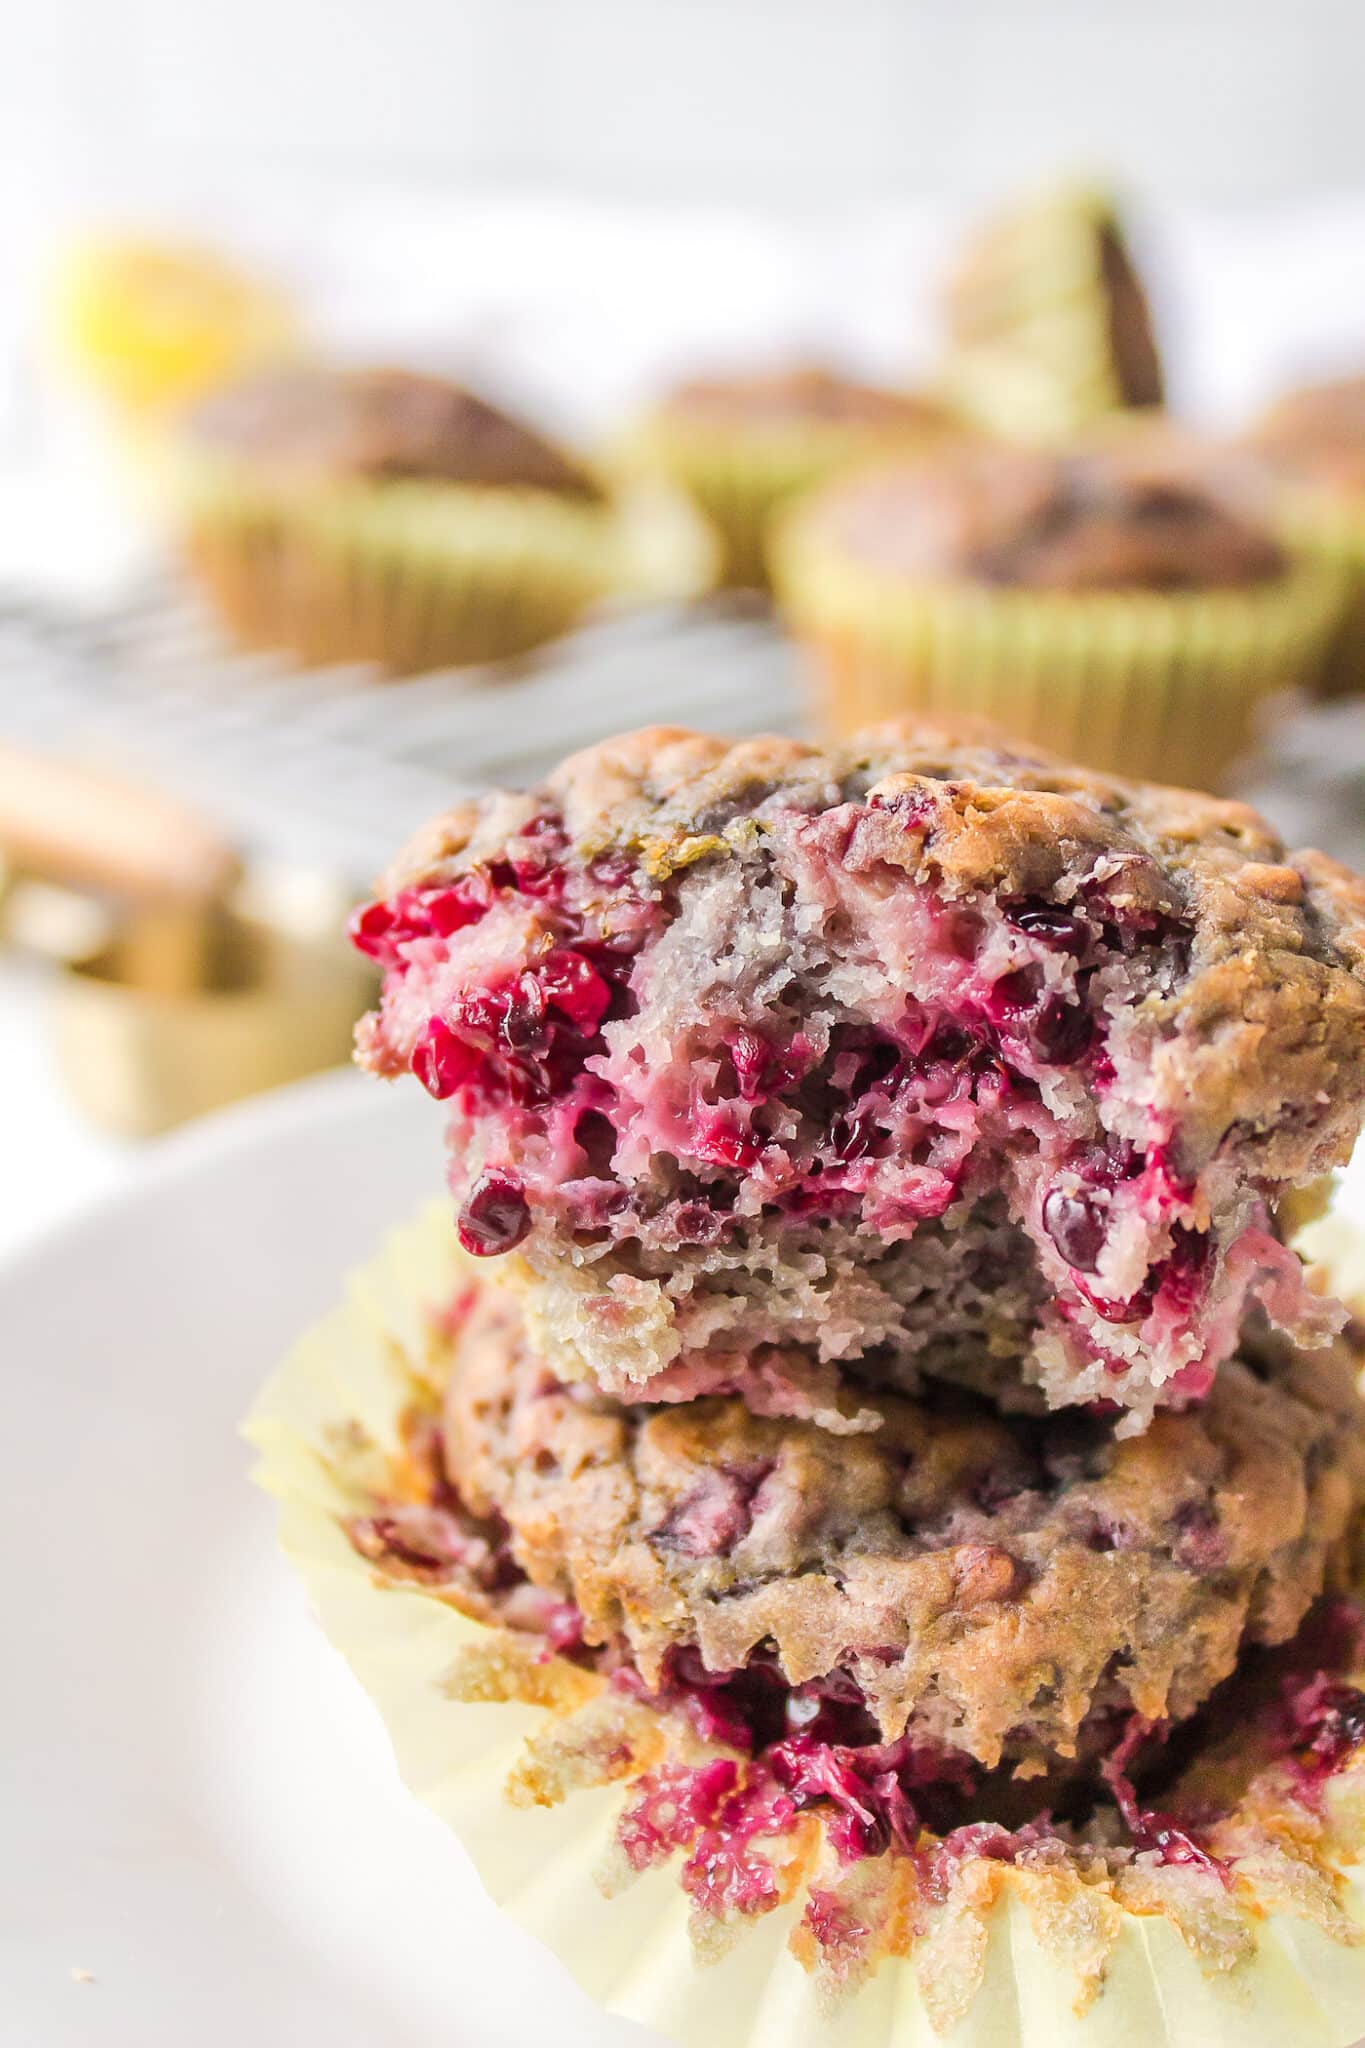 vegan blackberry muffins stacked on each other with a bite taken from one.